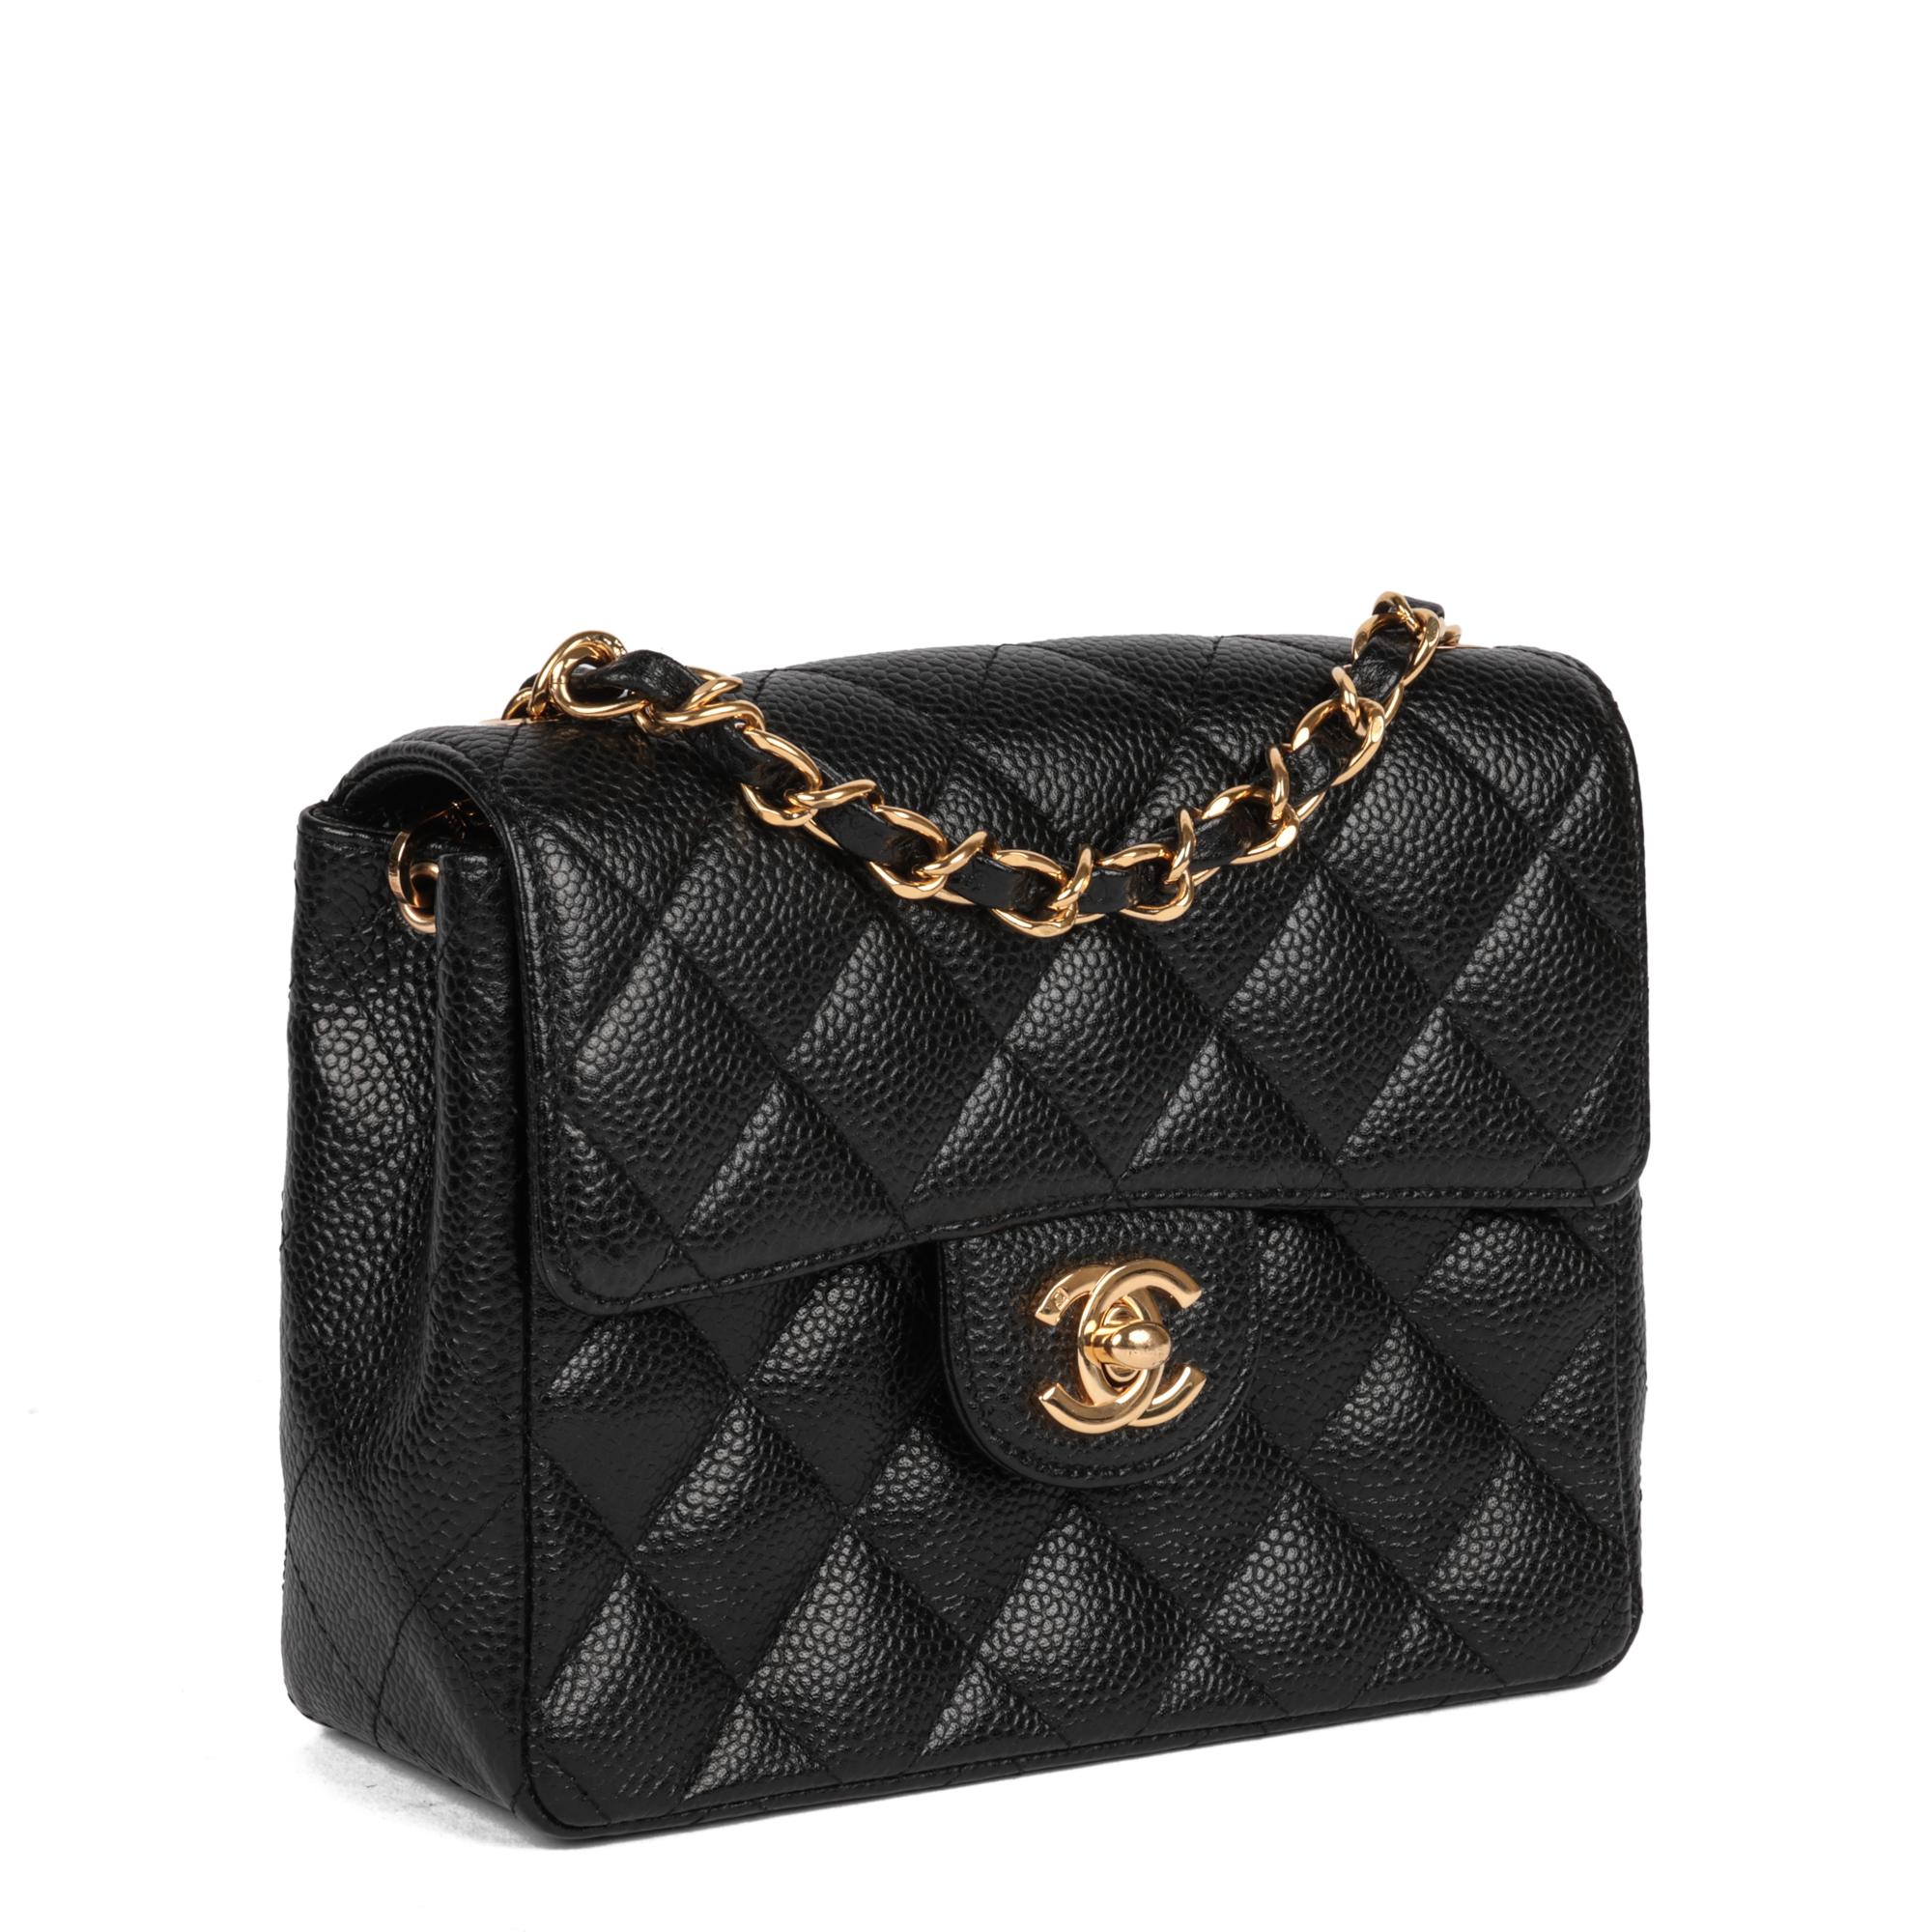 CHANEL
Black Quilted Caviar Leather Vintage Square Mini Flap Bag

Serial Number: 10392505
Age (Circa): 2005
Accompanied By: Chanel Dust Bag, Box, Ribbon, Authenticity Card
Authenticity Details:  Authenticity Card, Serial Sticker (Made in